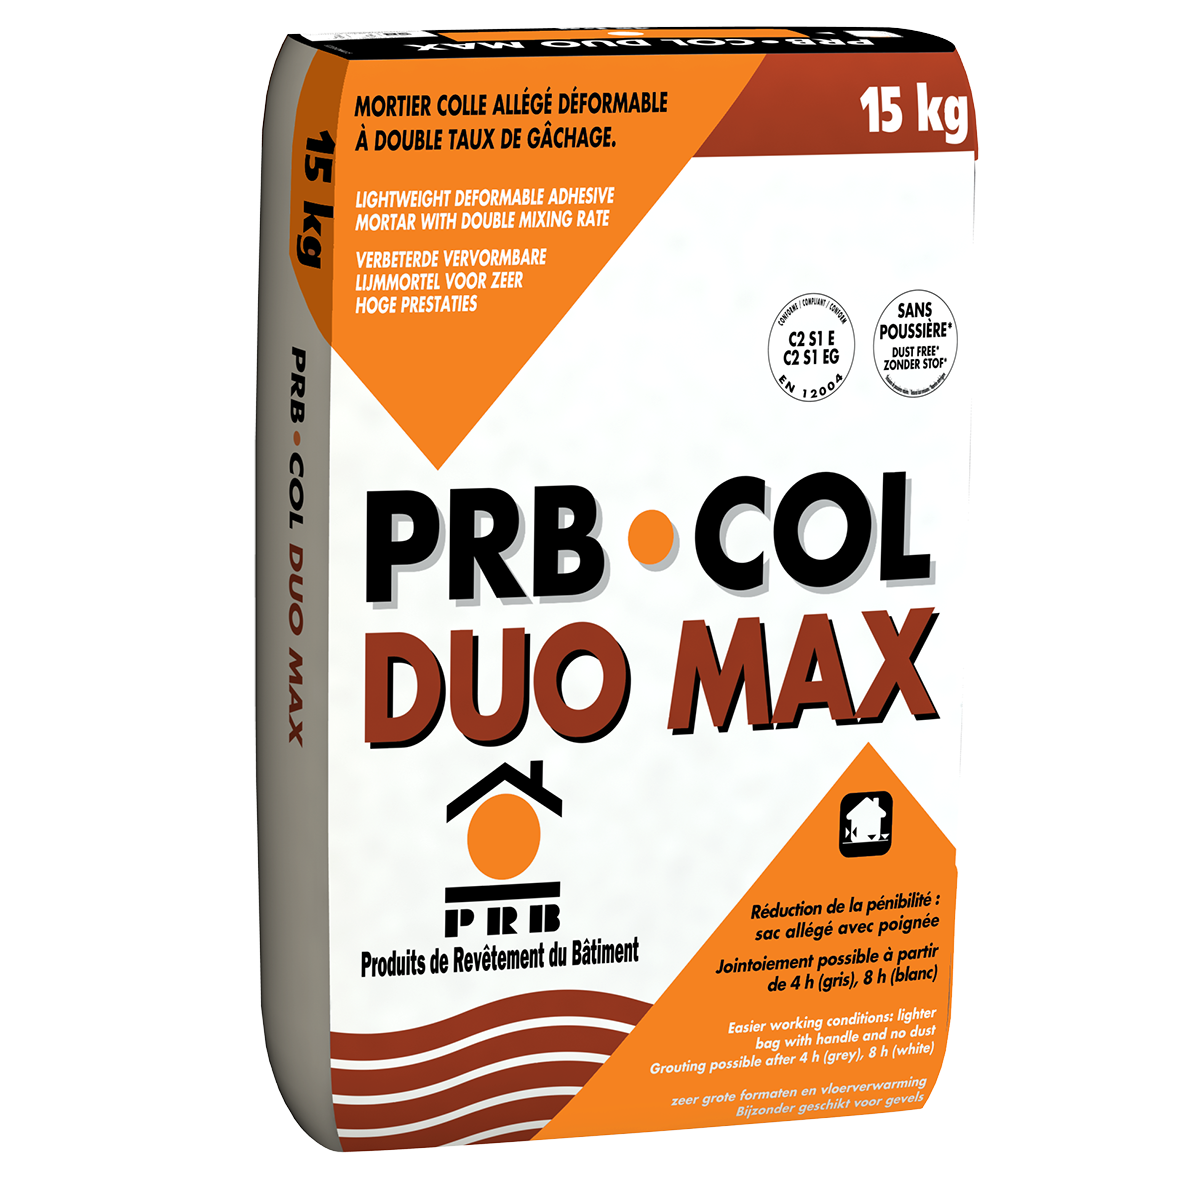 mortier-colle-allege-deformable-col-duo-max-blanc-15-kg-prb-0